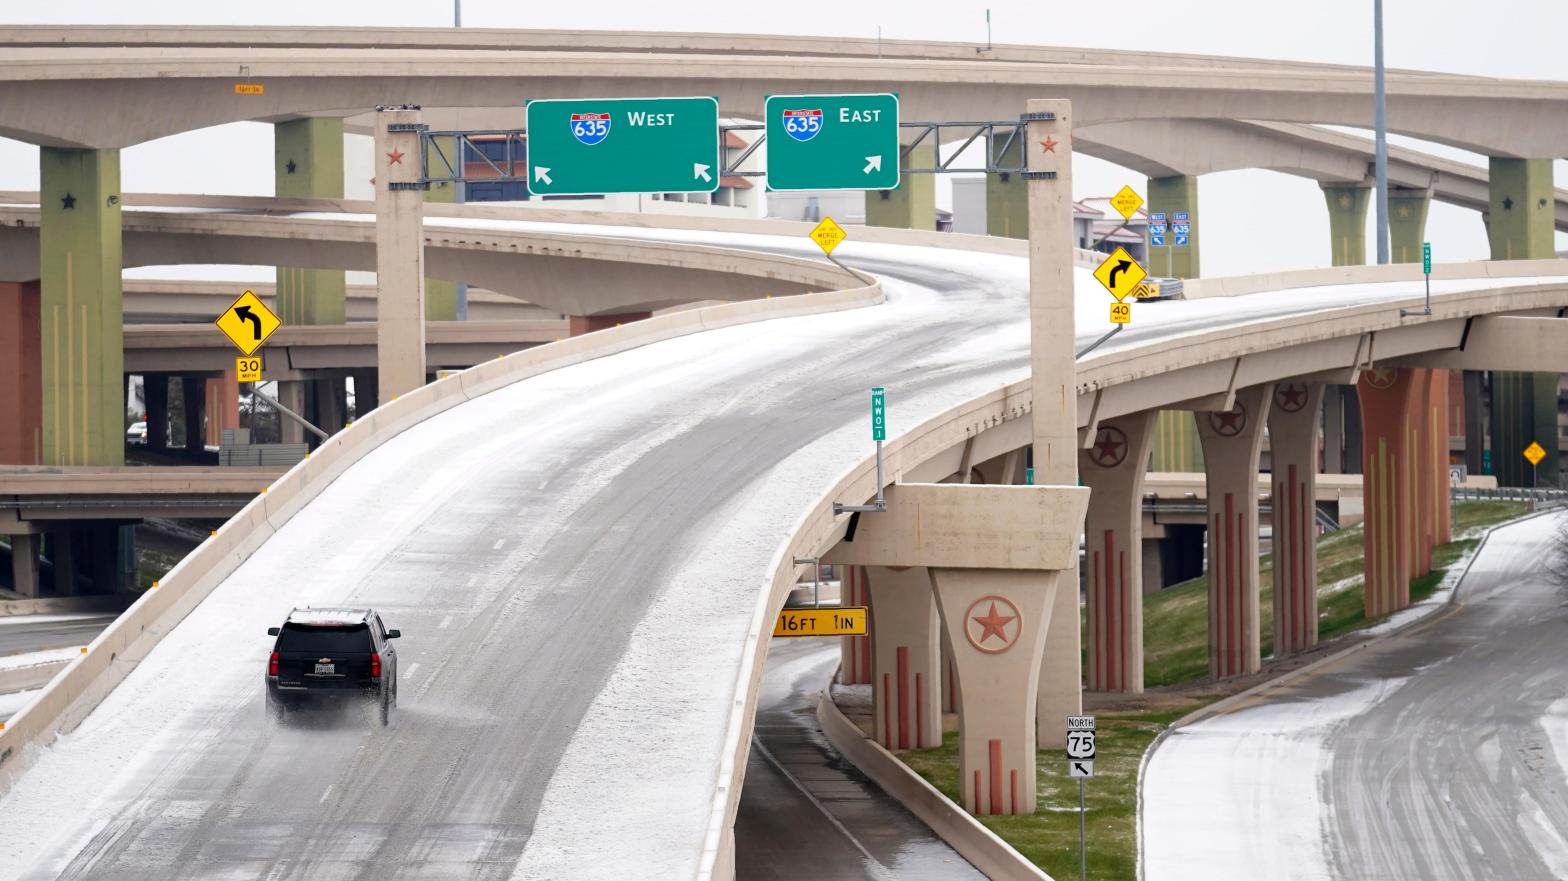 A driver slowly navigates through icy road conditions on the US 75 highway and LBJ 635 interchange Tuesday, Jan. 31, 2023, in Dallas. (Photo: Tony Gutierrez, AP)